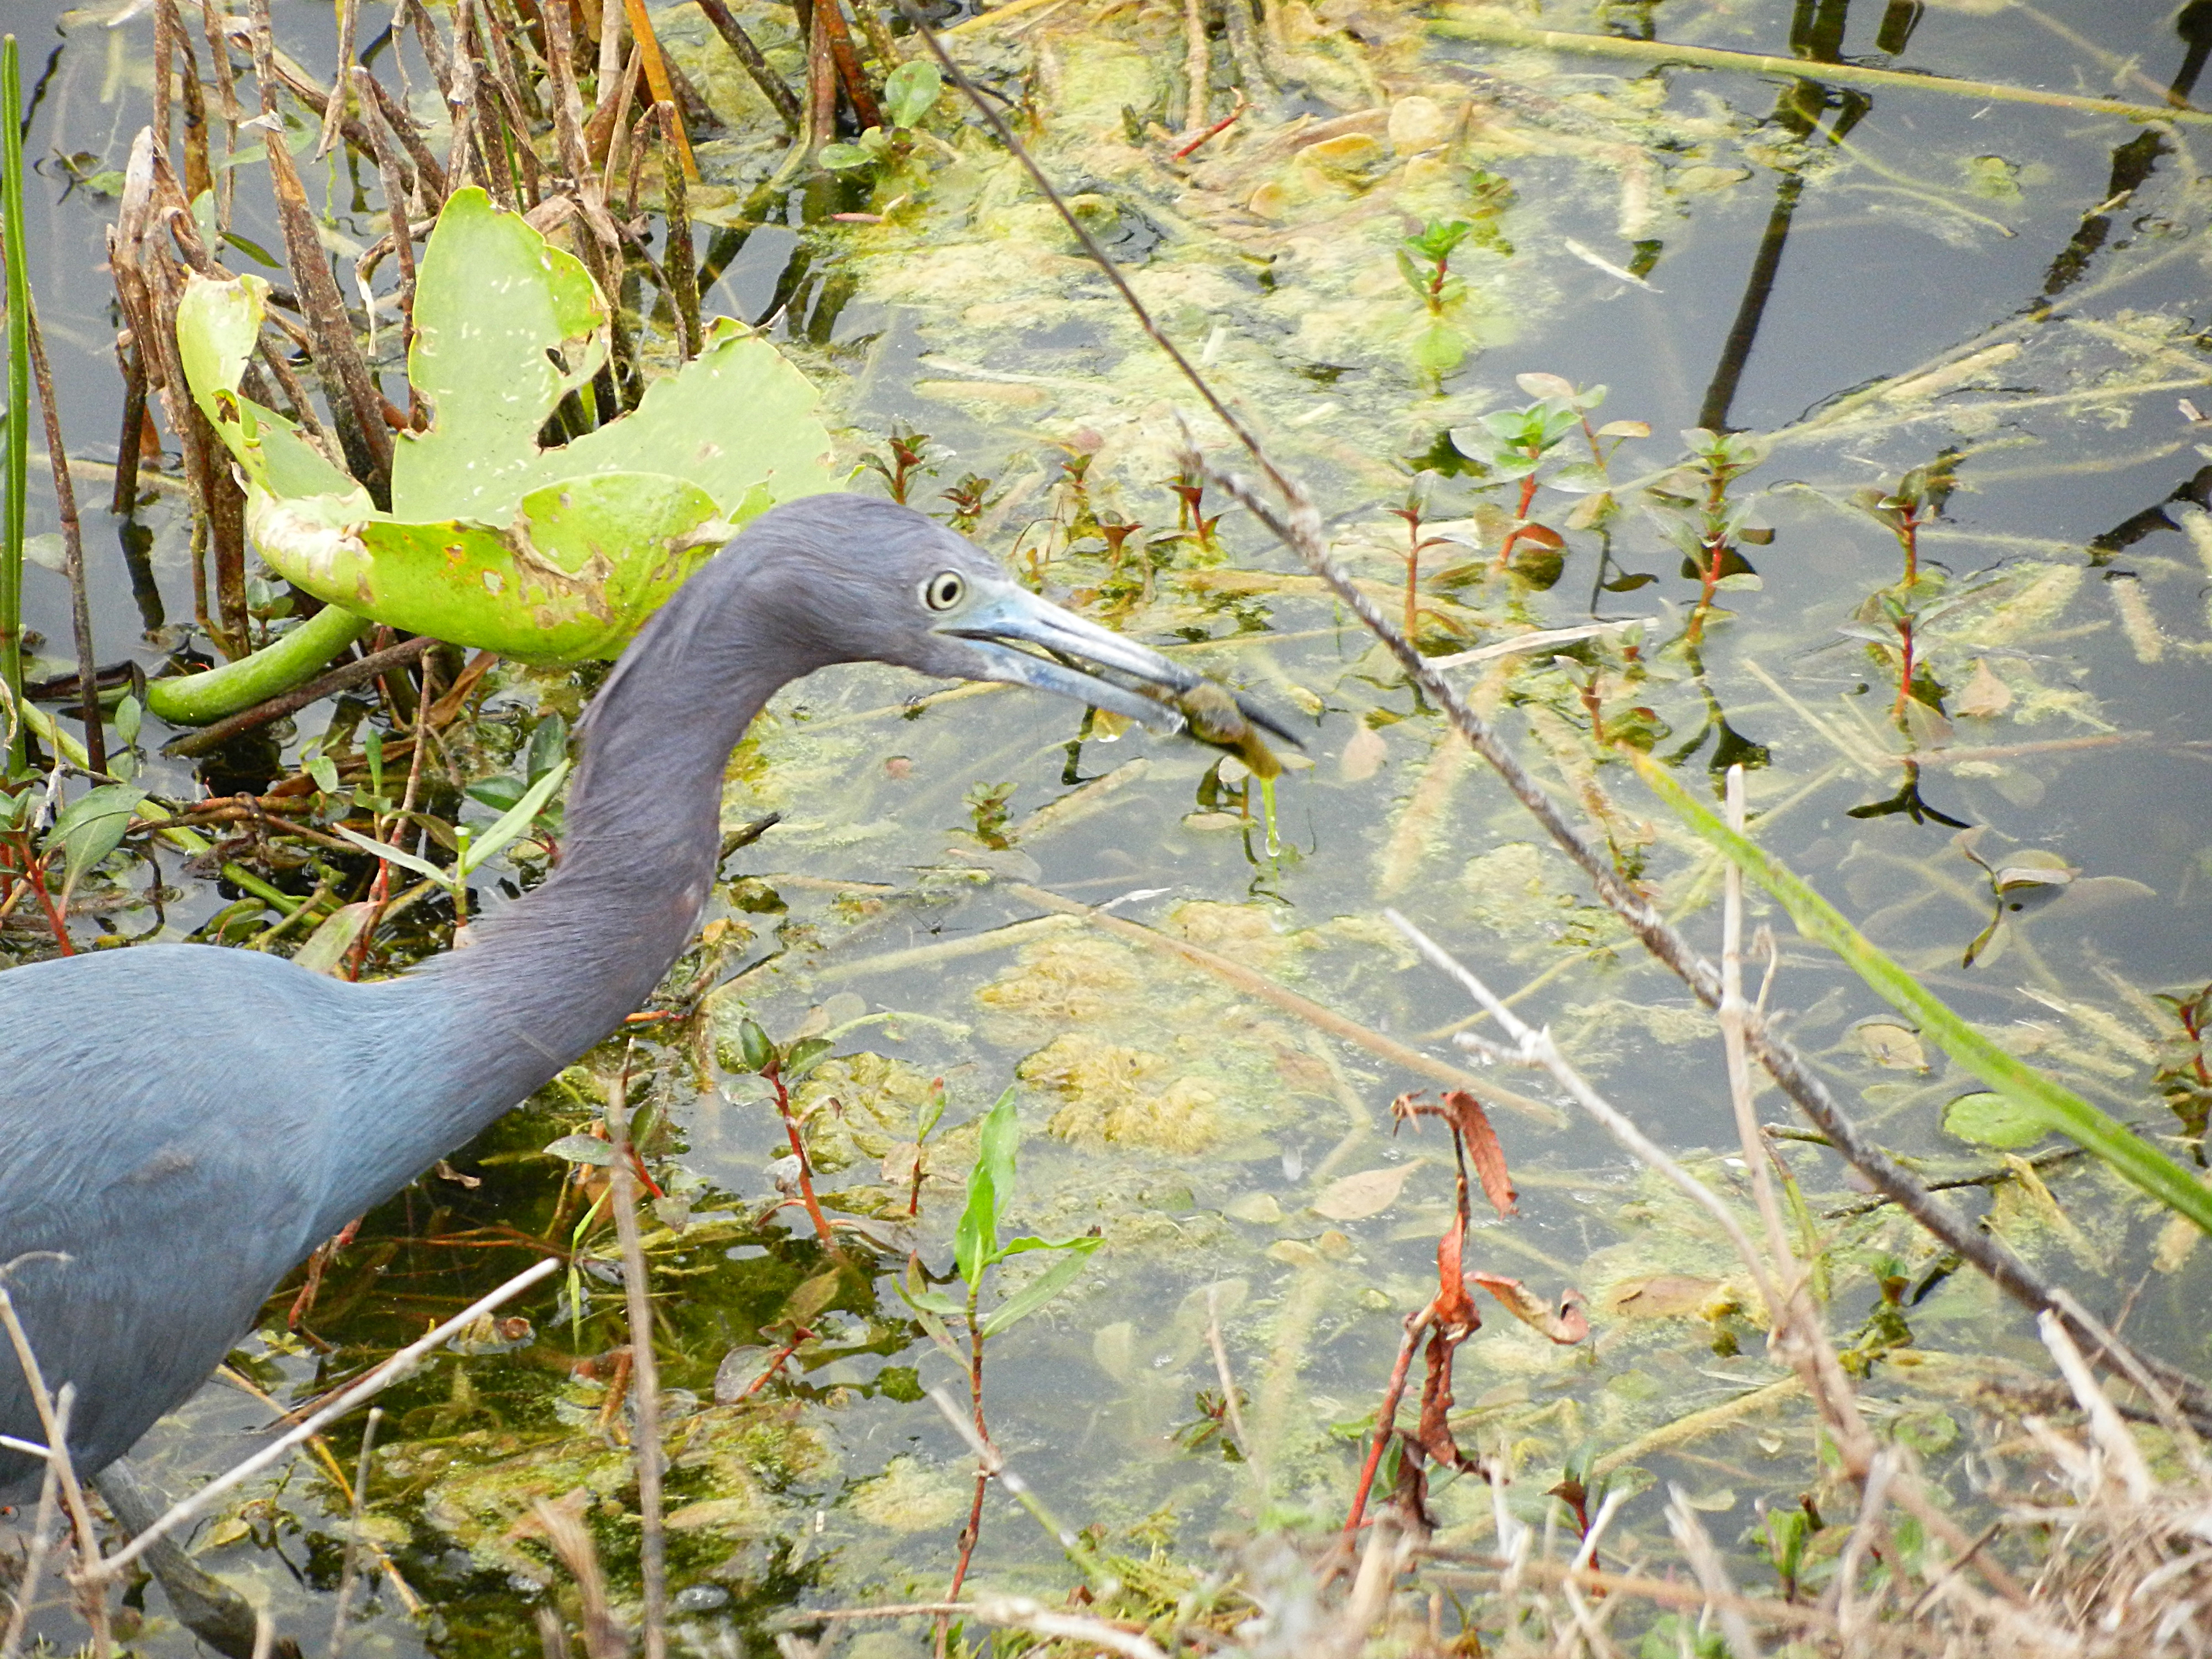 Blue Heron with a fish in its mouth.